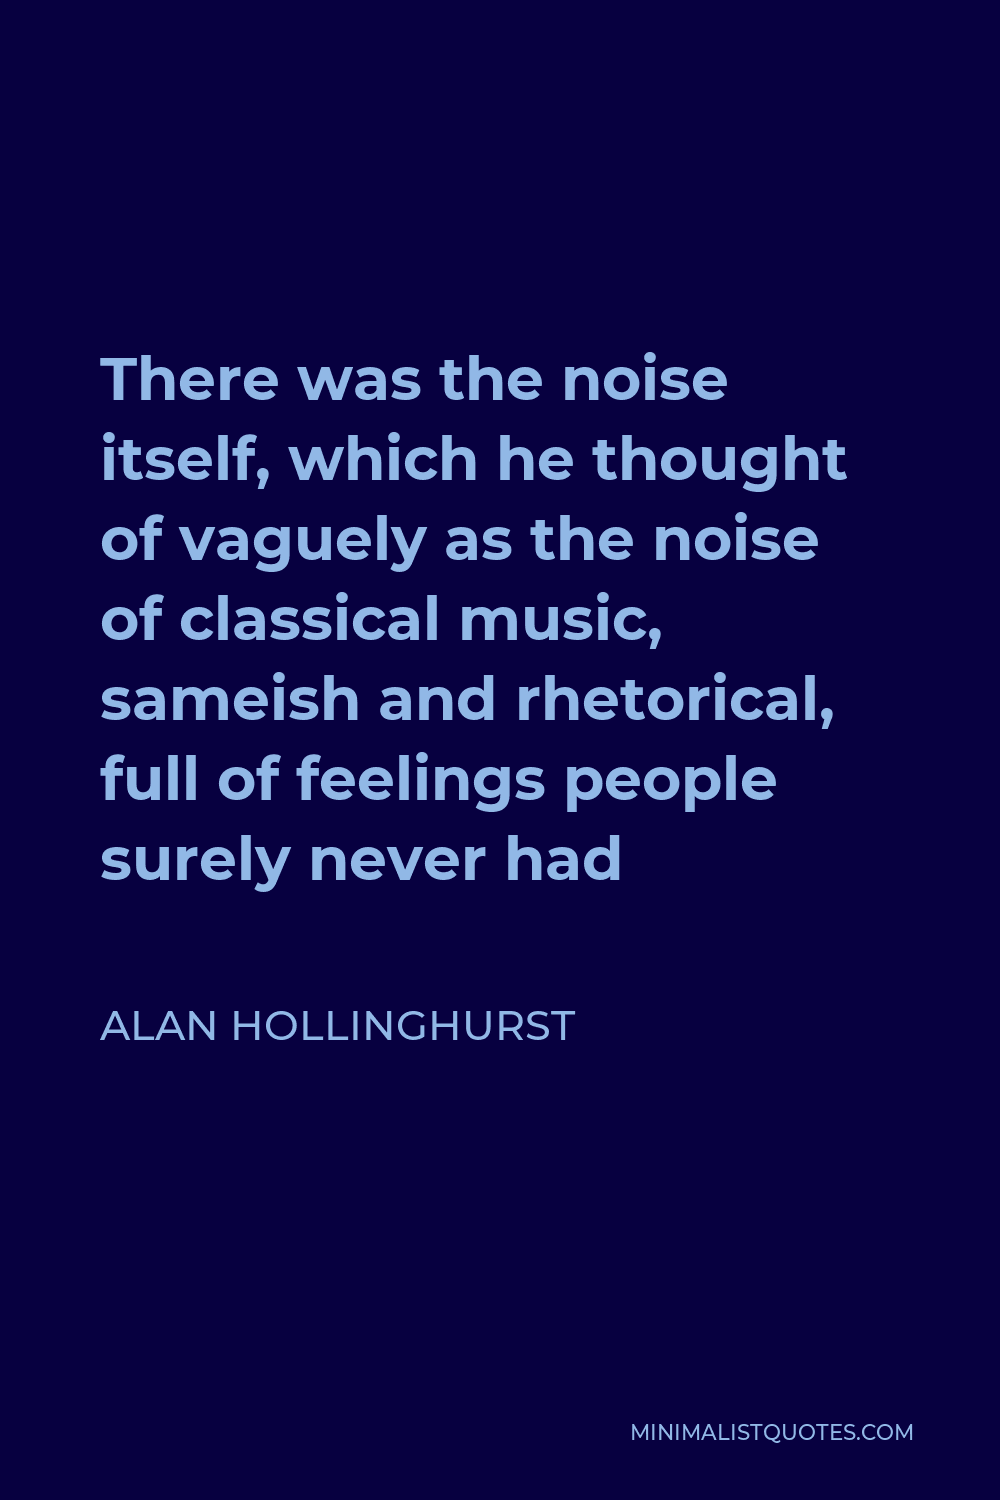 Alan Hollinghurst Quote - There was the noise itself, which he thought of vaguely as the noise of classical music, sameish and rhetorical, full of feelings people surely never had